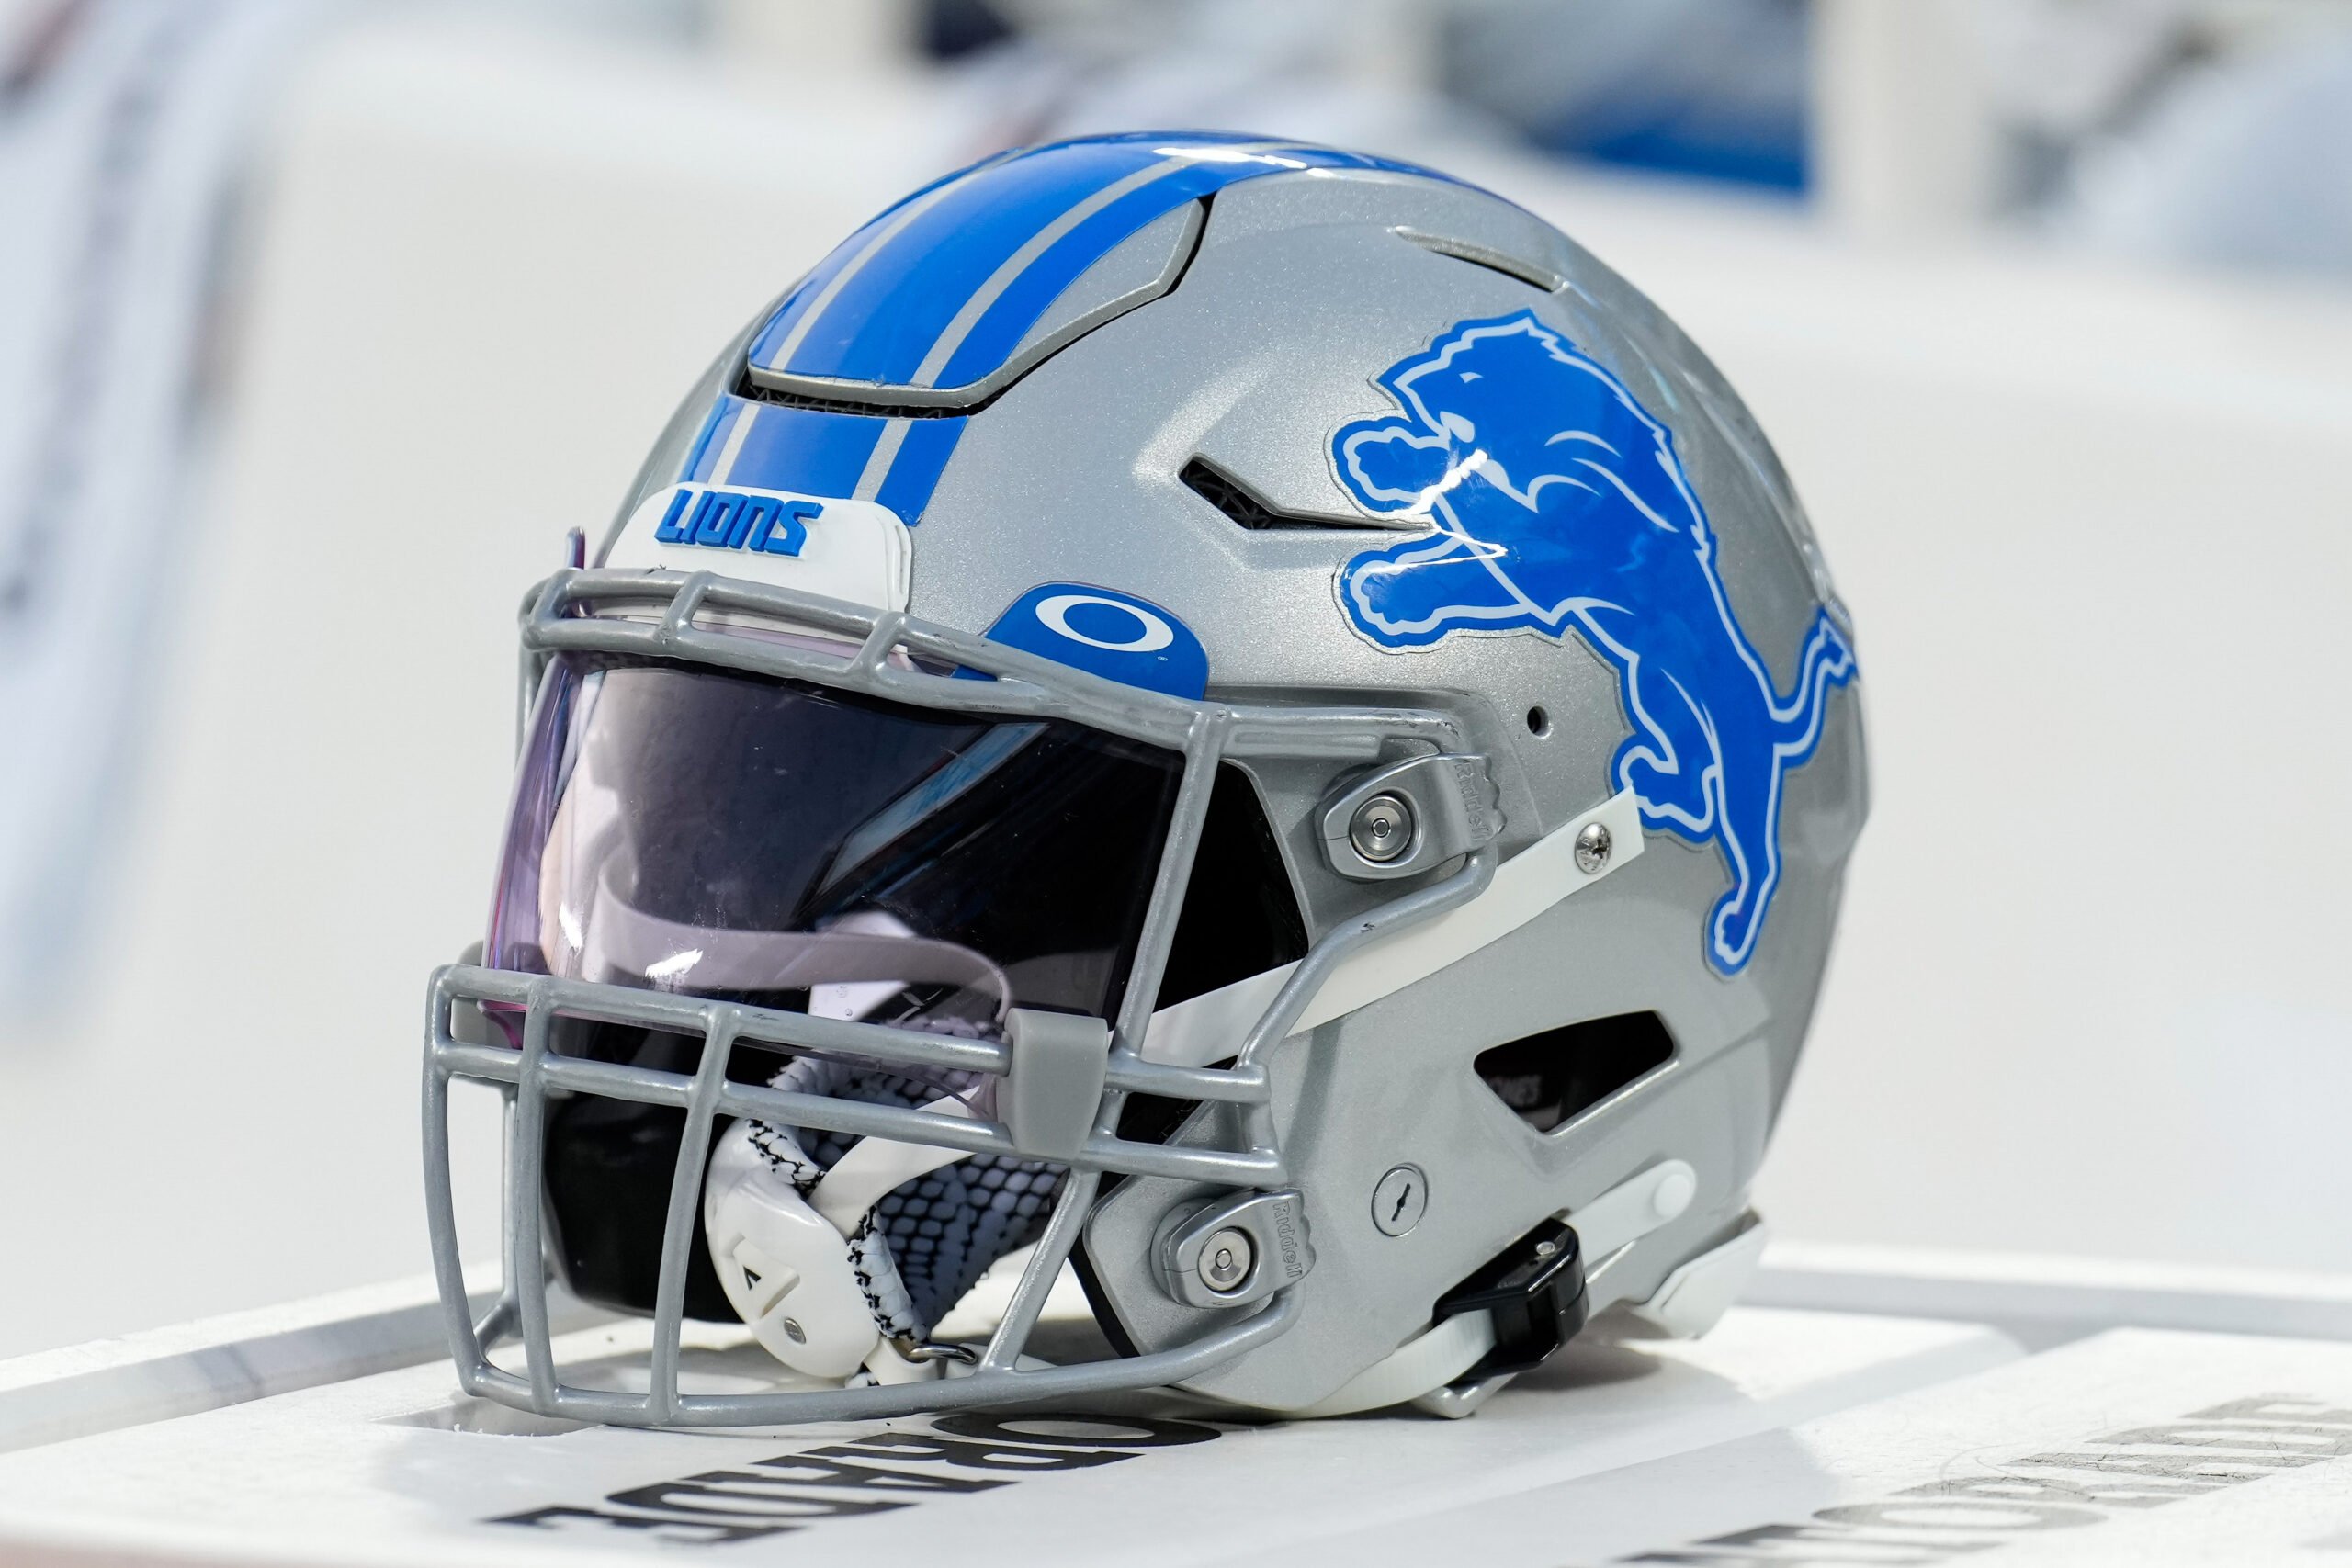 Detroit Lions Coaching Staff: Who Is On the Lions' Coaching Staff?